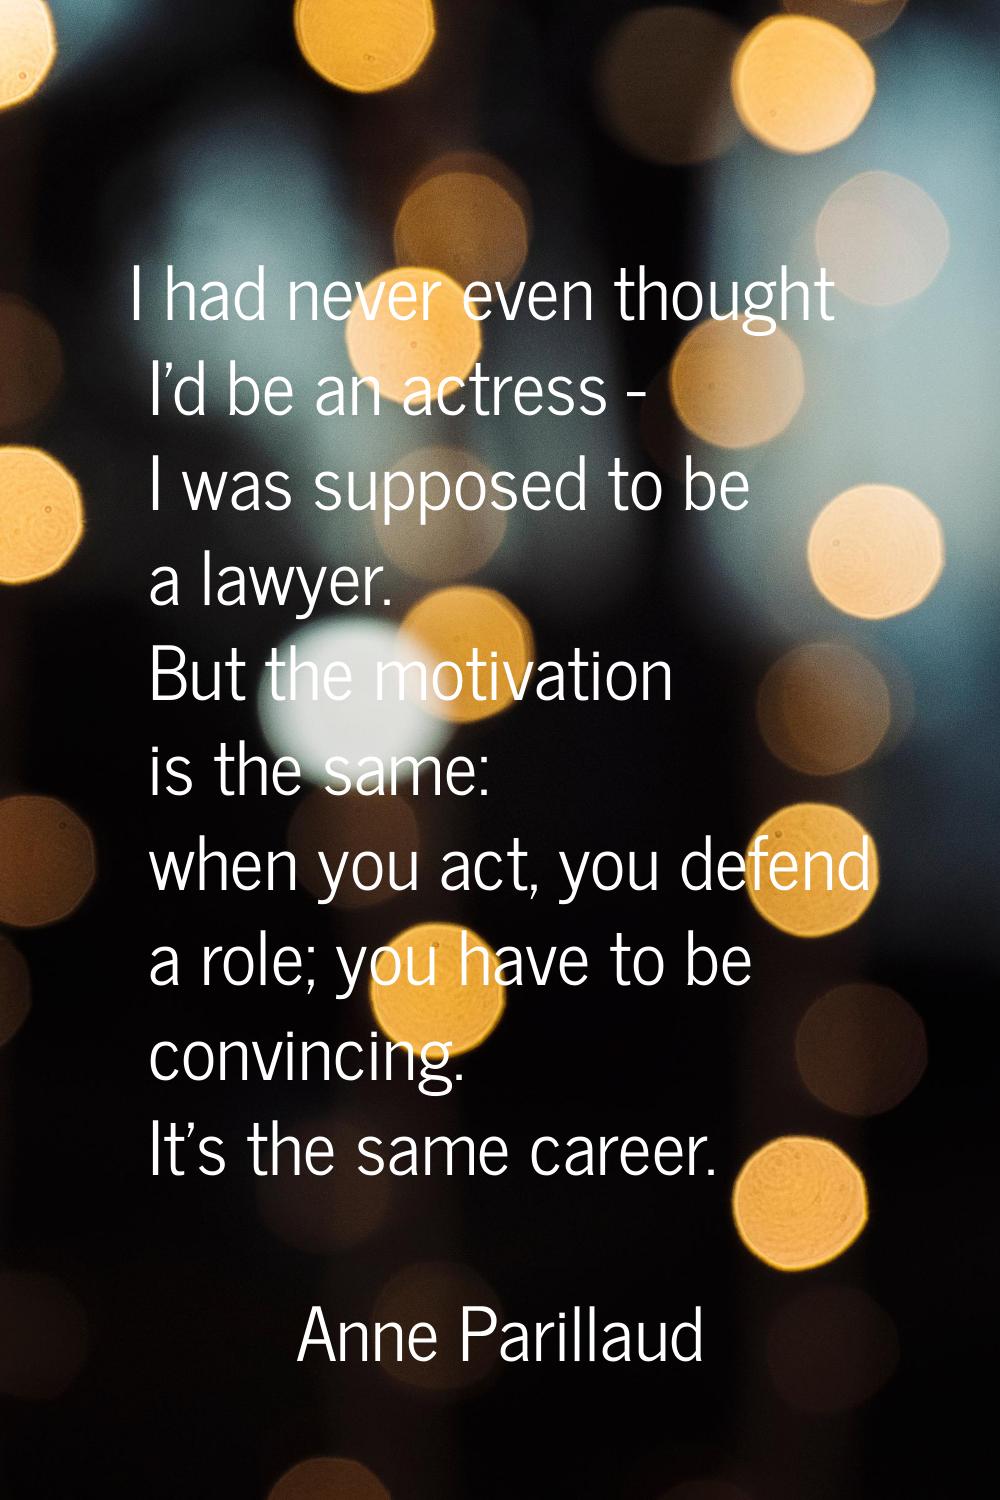 I had never even thought I'd be an actress - I was supposed to be a lawyer. But the motivation is t